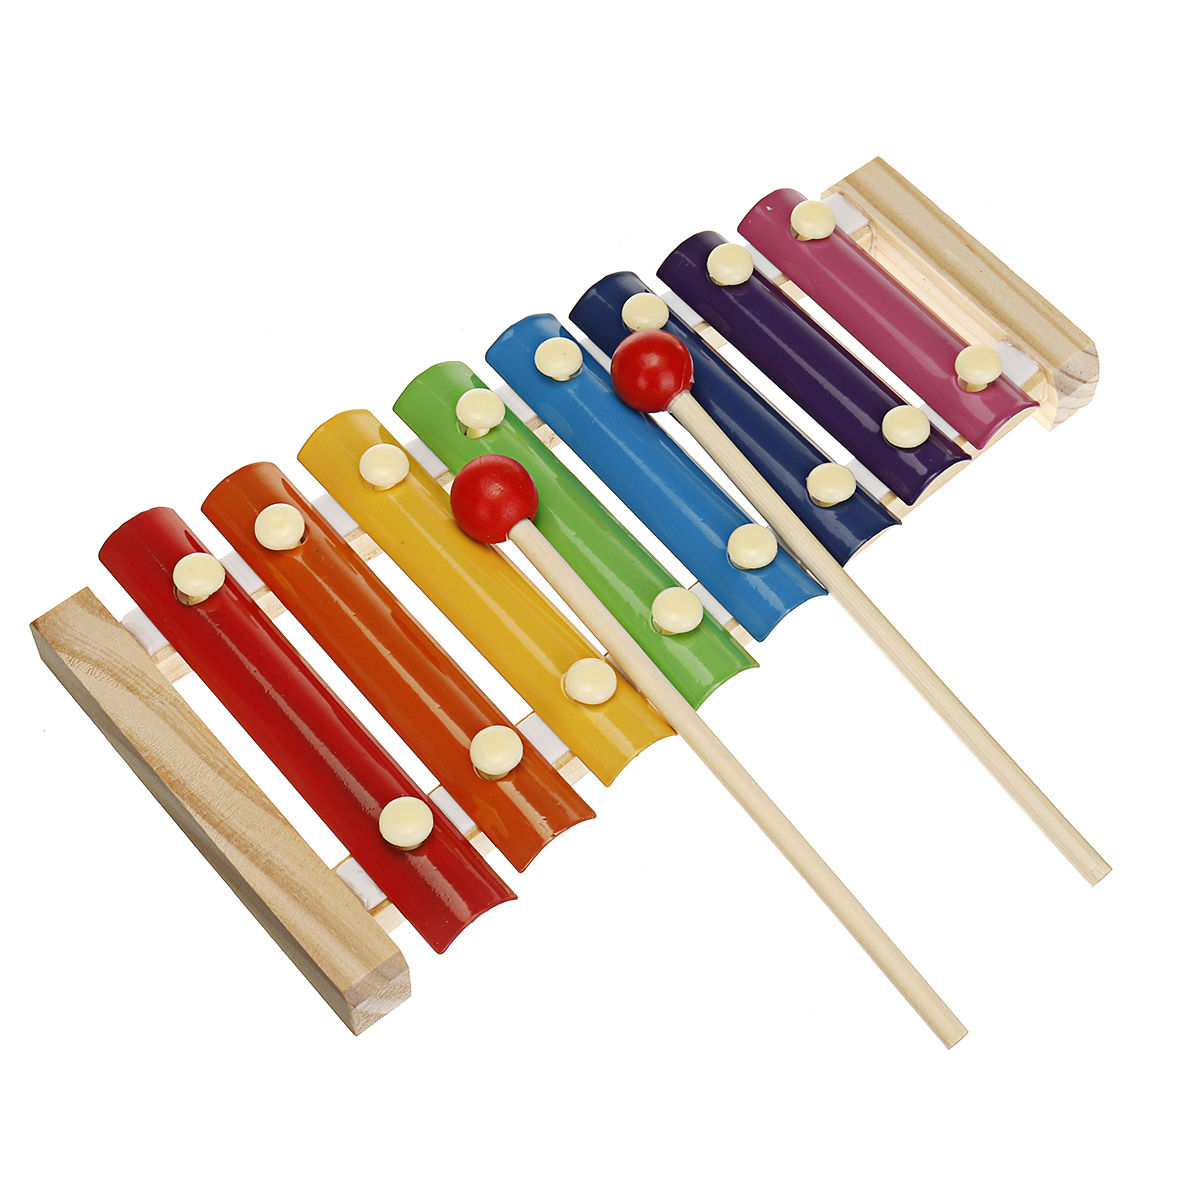 713-Pcs-Colorful-Musical-Percussion-Safe-Non-toxic-Instruments-Kit-Early-Educational-Toy-for-Kids-Gi-1805313-5